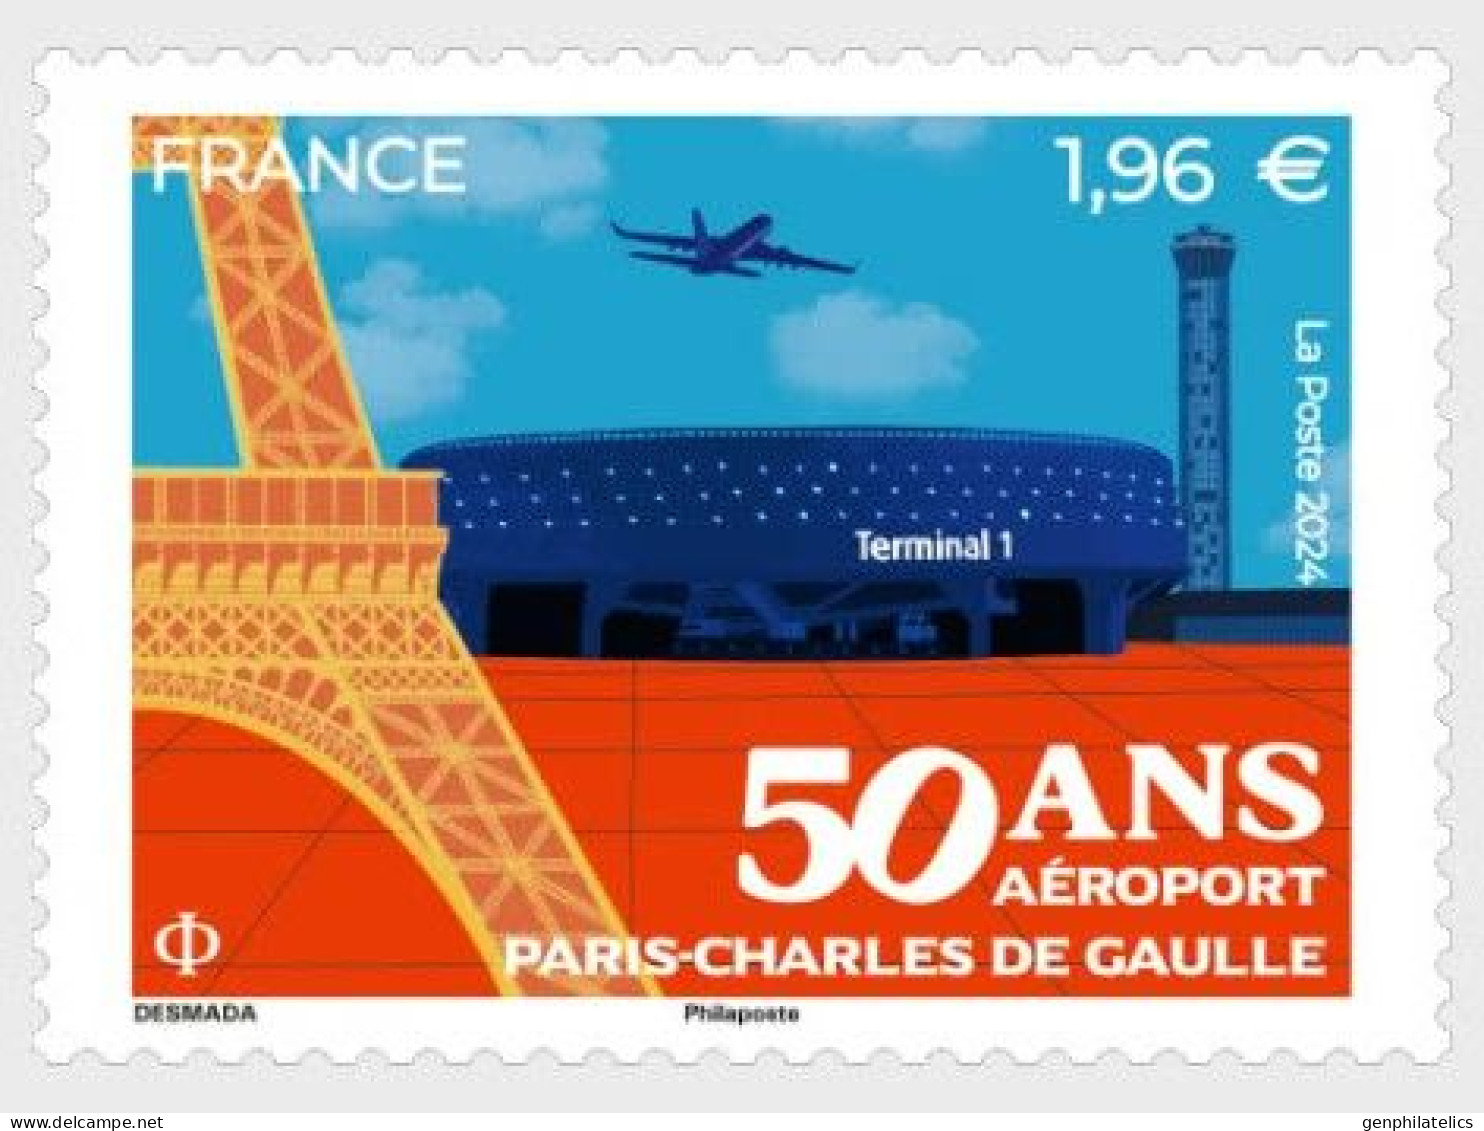 FRANCE 2024 EVENTS 50th Anniv. Of The Charles De Gaulle Airport - Fine Stamp MNH - Unused Stamps